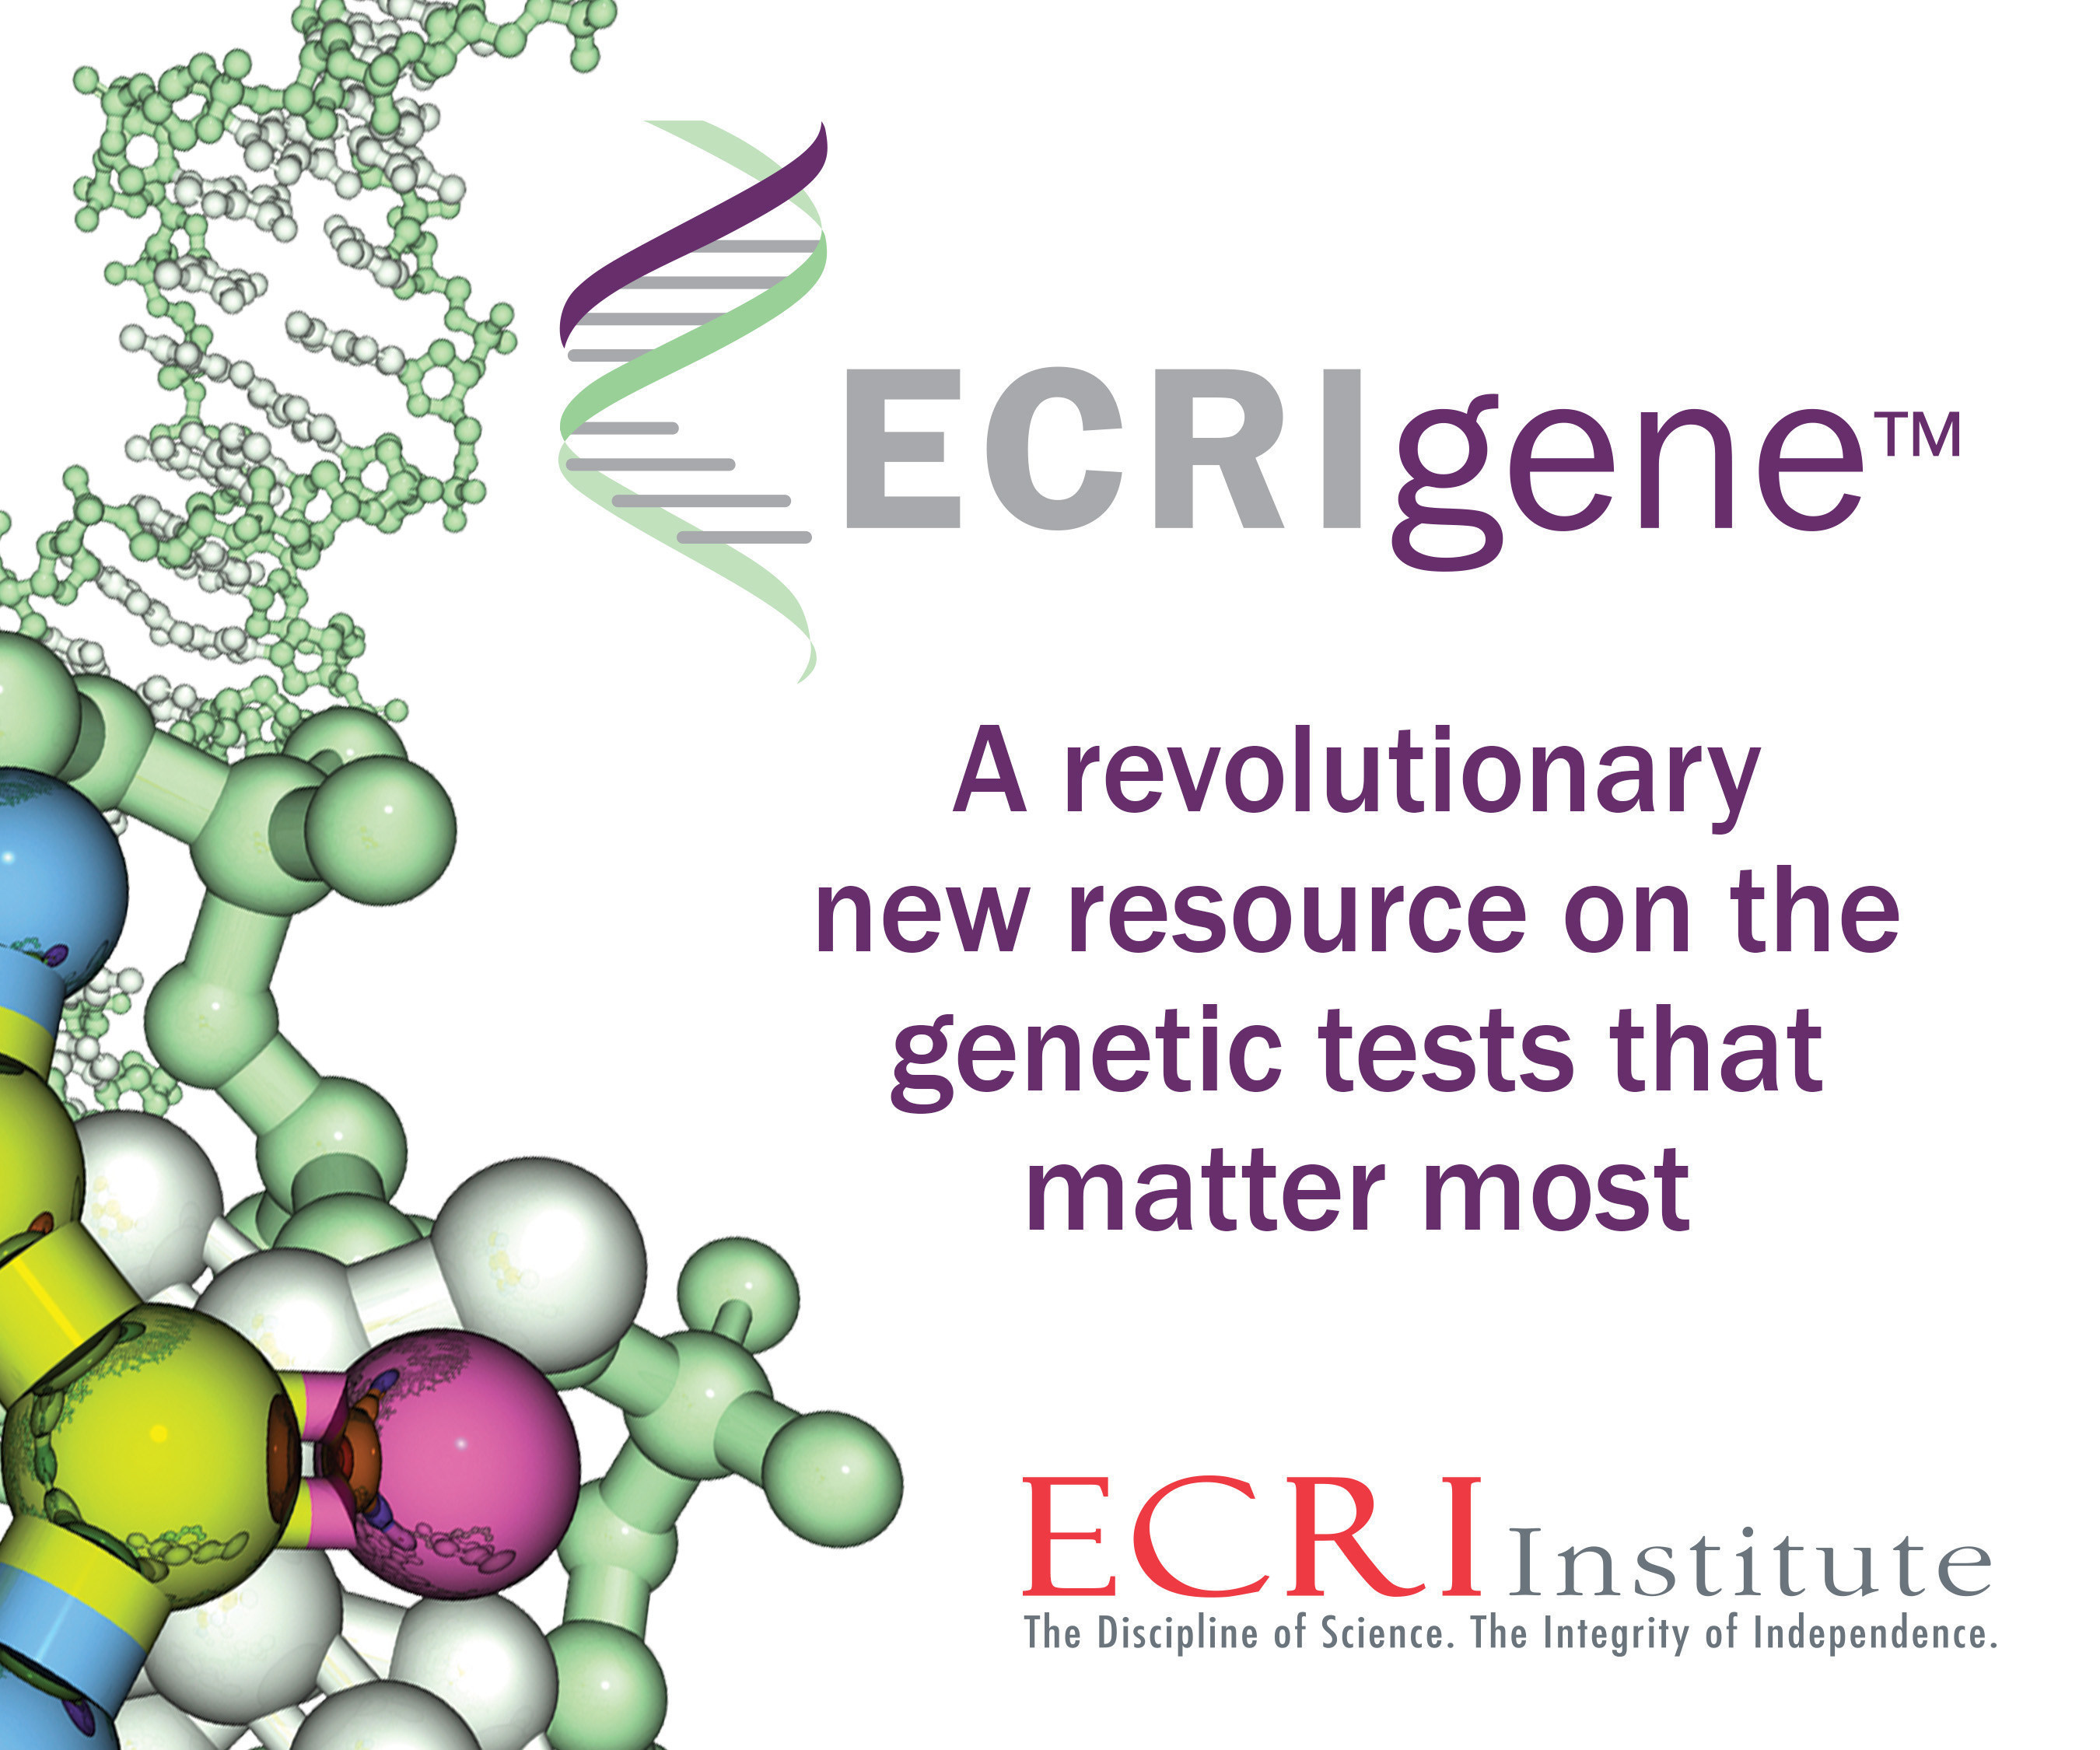 ECRIgene is a revolutionary new resource on the genetic tests that matter most. Learn more at www.ecri.org/ecrigene.